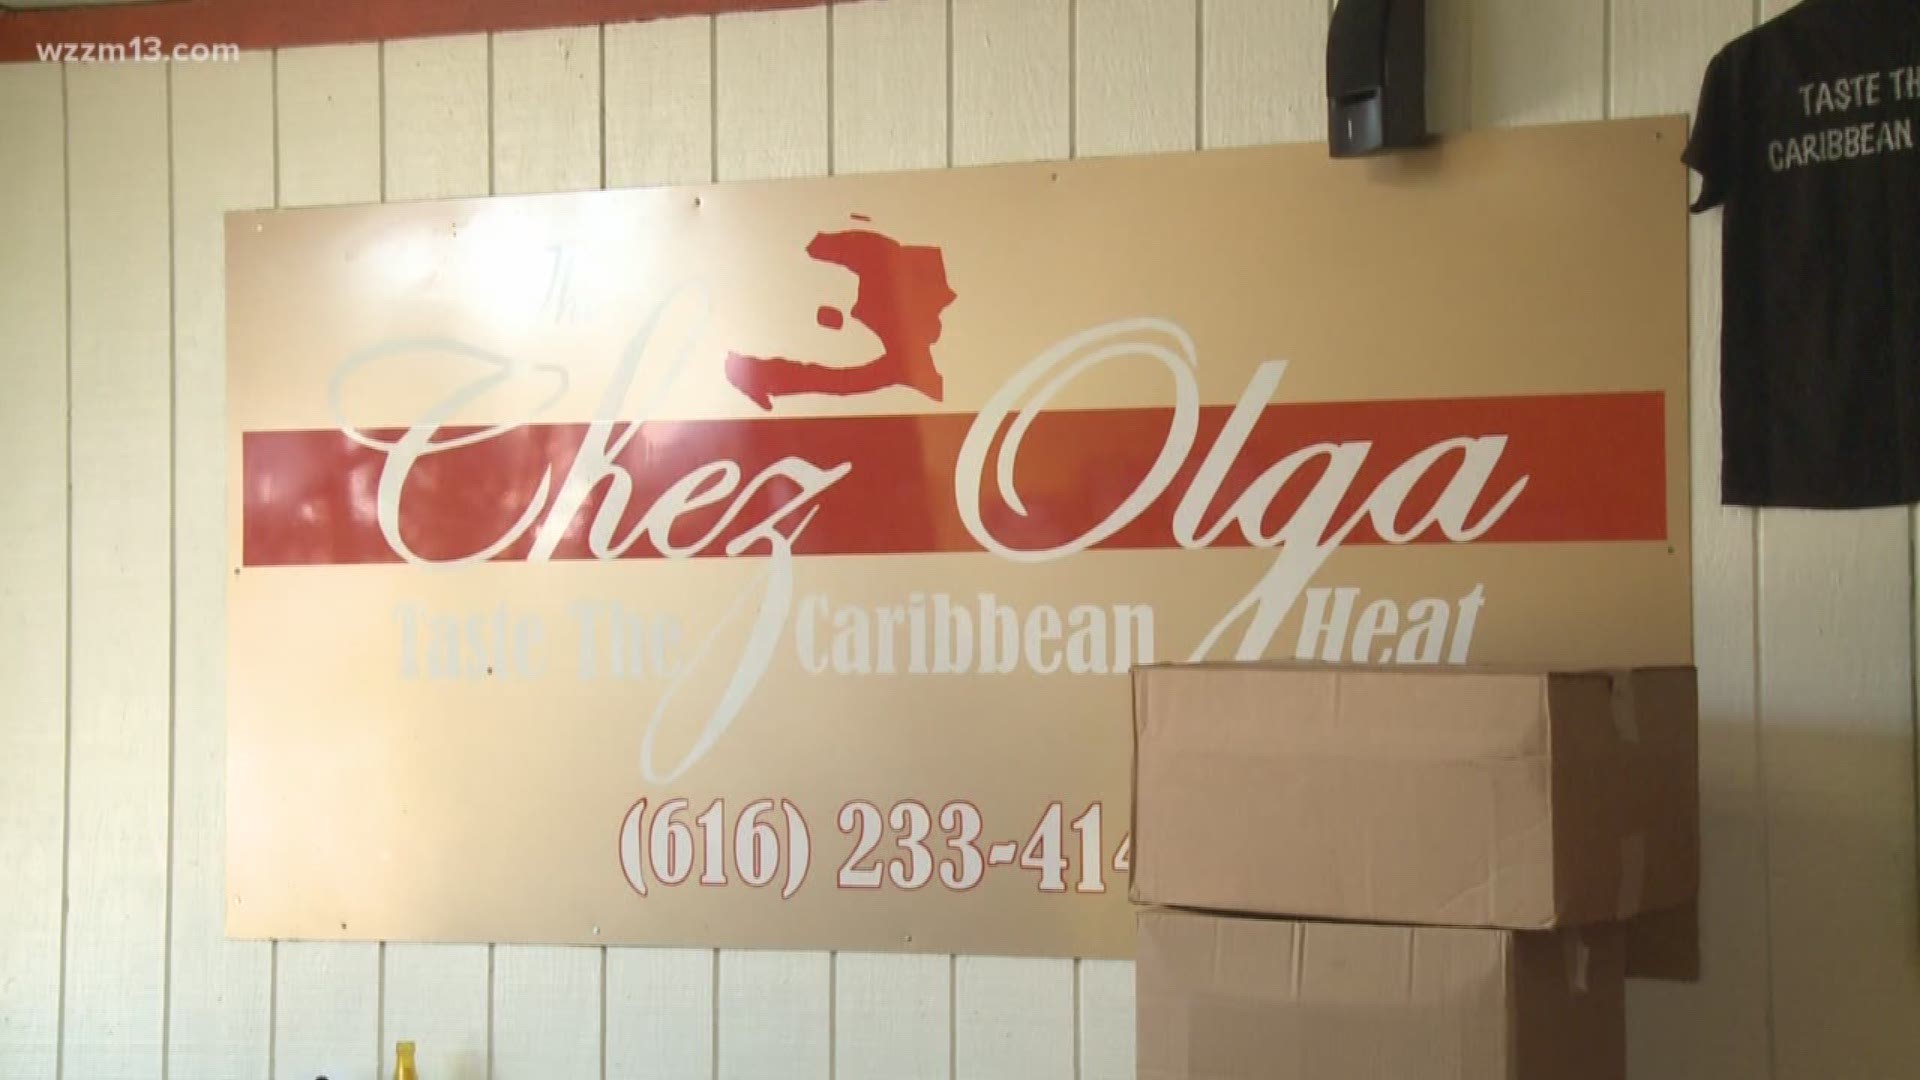 Beloved, local Caribbean restaurant Chez Olga has been struggling in some ways, but will hopefully see new success after this month. The Food Network's Restaurant Impossible will be coming to Grand Rapids on to turn the restaurant around.